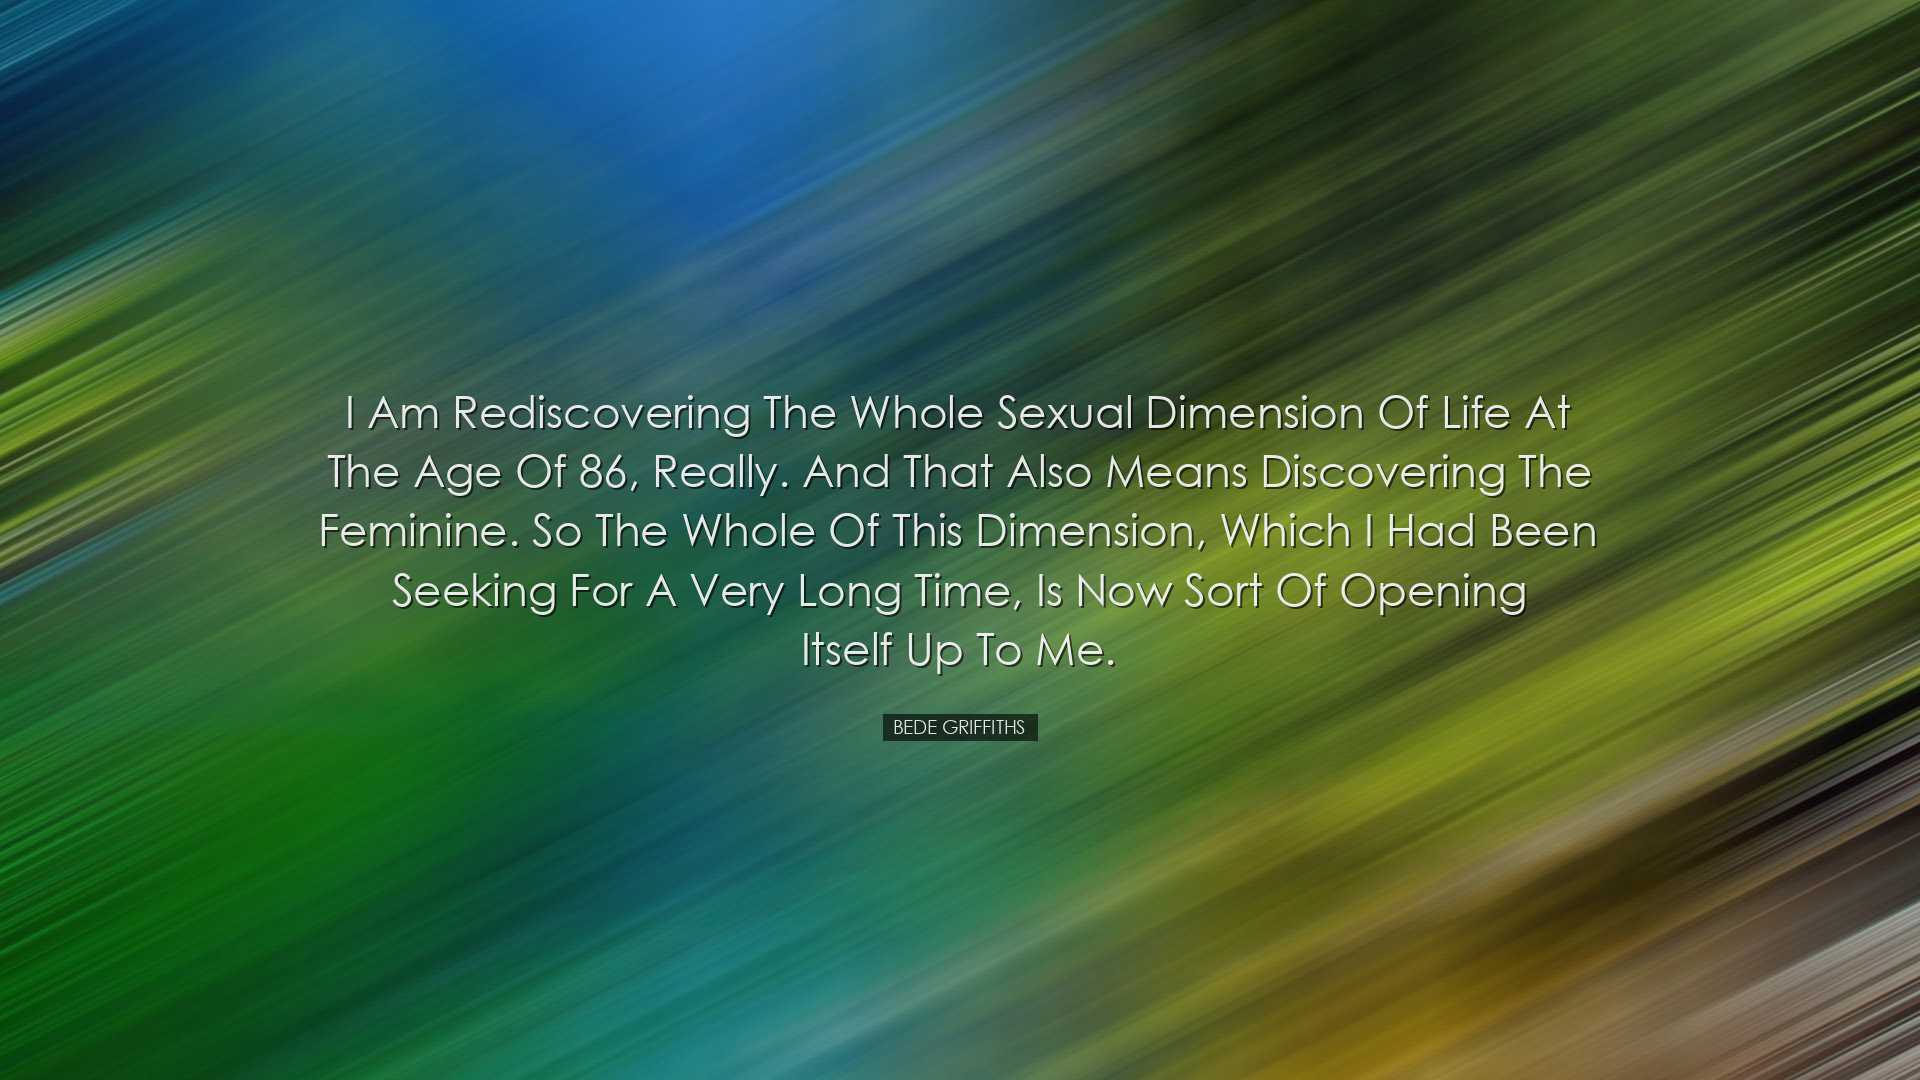 I am rediscovering the whole sexual dimension of life at the age o